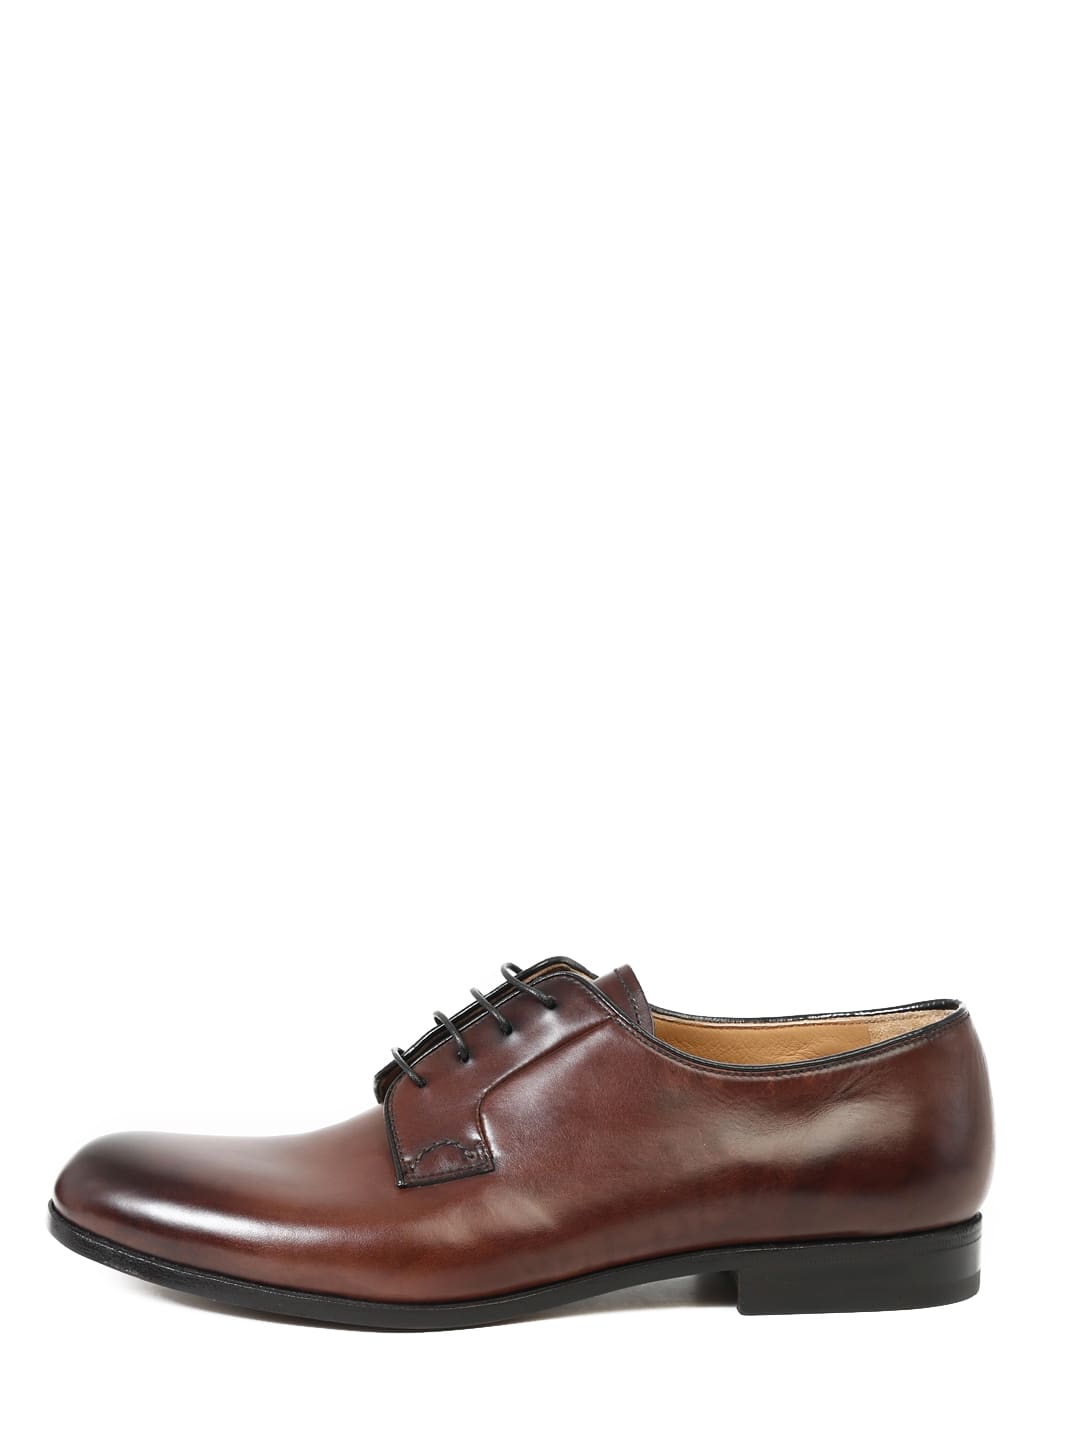 CHURCH'S LEATHER LACE-UP SHOES BROWN,EEB3309AG4F0AEV